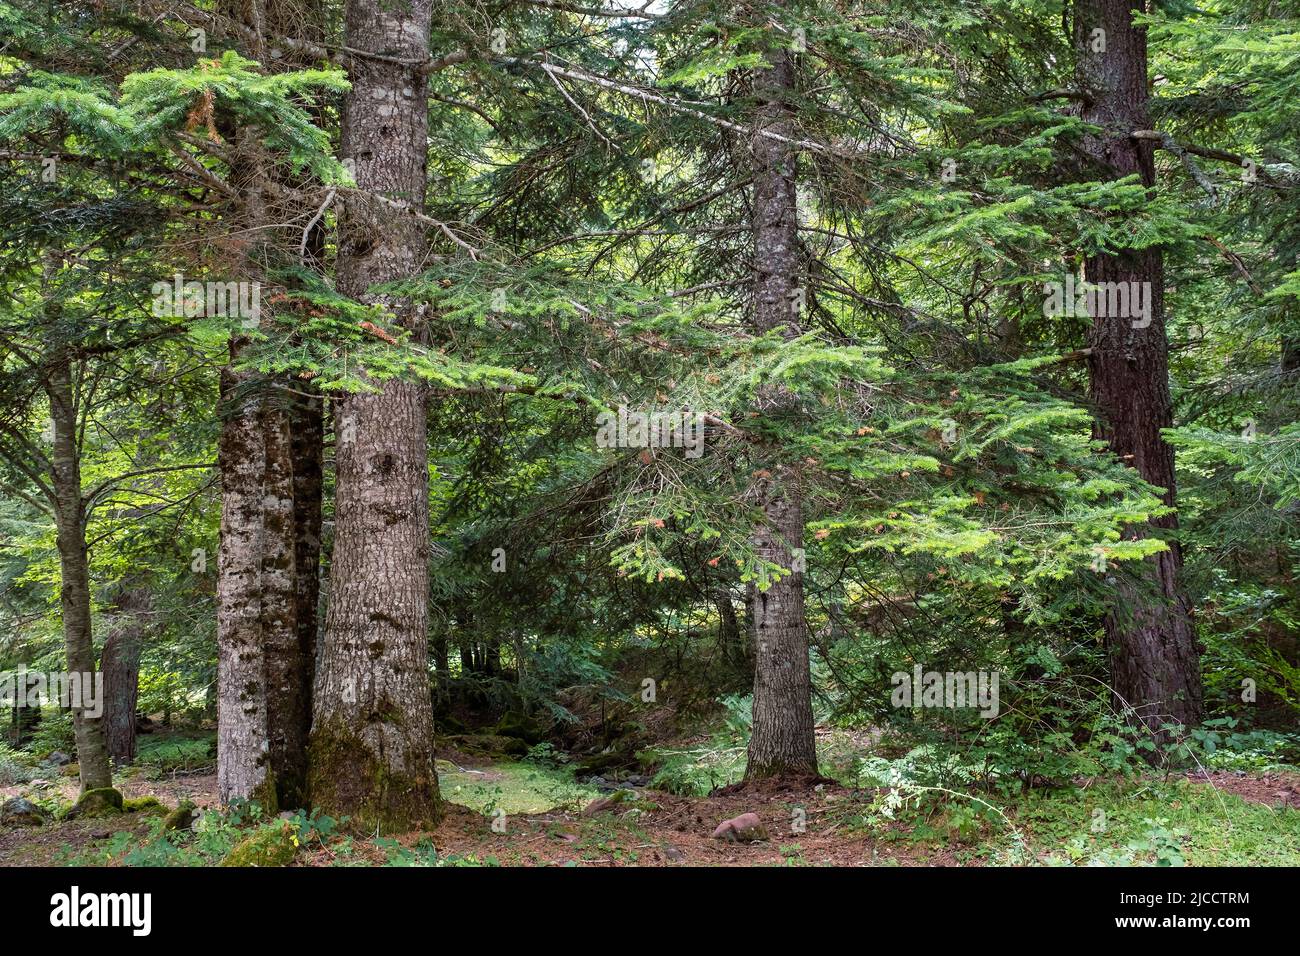 Silver firs (Abies Alba) in Oza forest, Spain Stock Photo